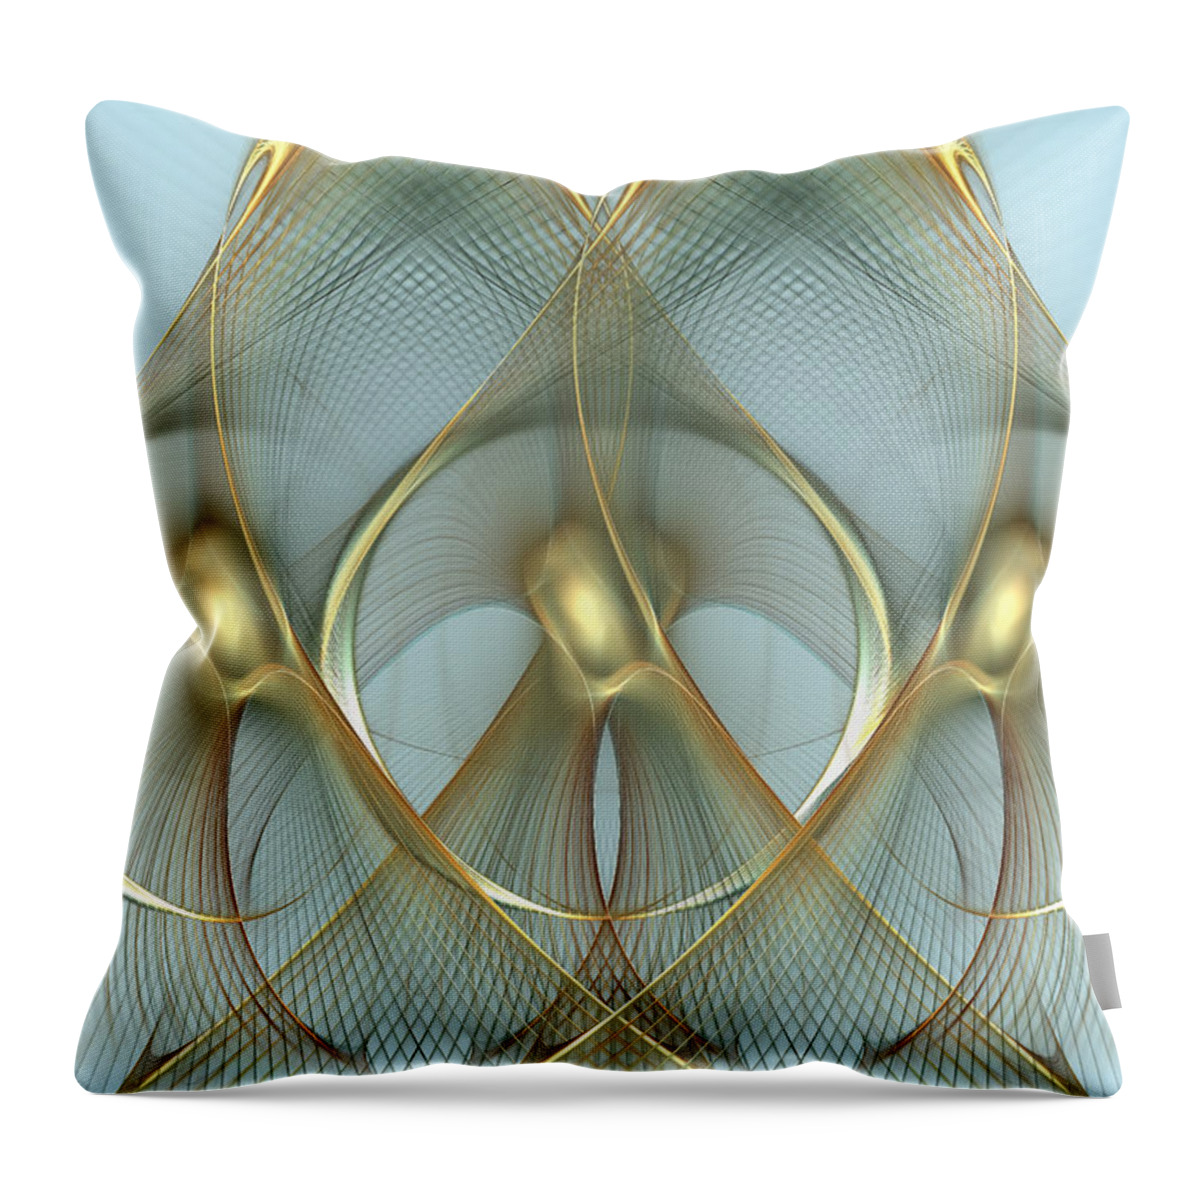 Wings Throw Pillow featuring the digital art Heavenly Wings Of Gold by Georgiana Romanovna